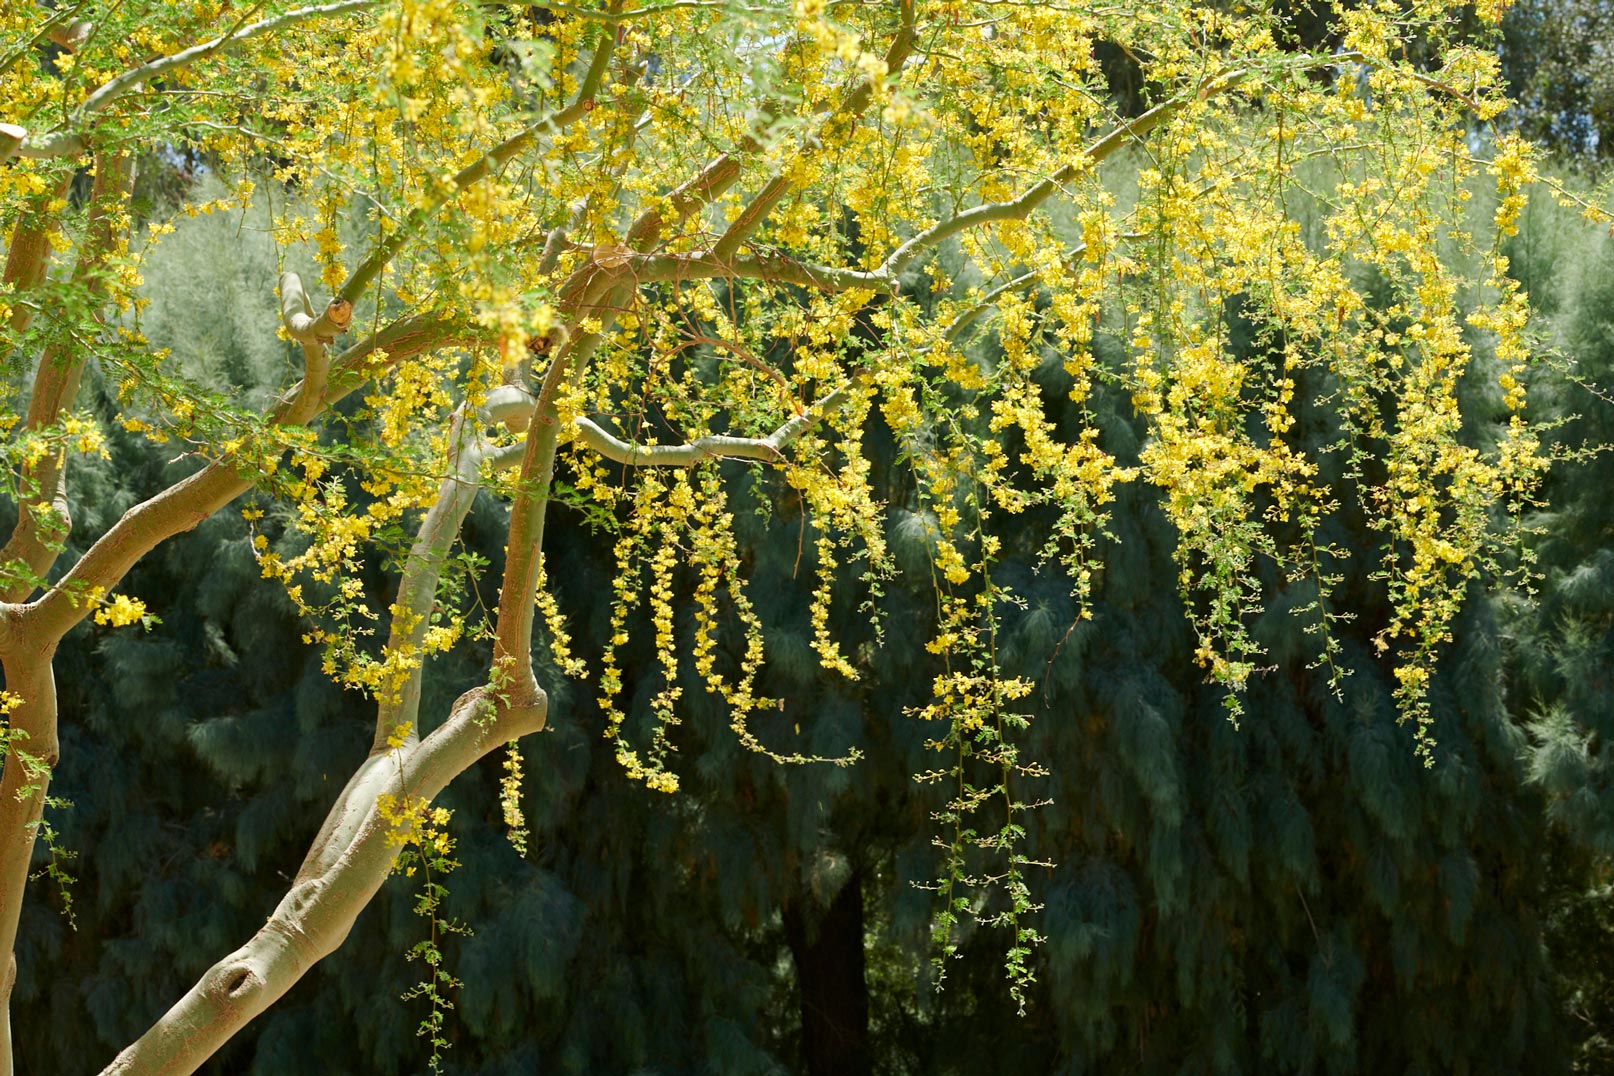 Multiple branches of Palo Brea with yellow blooms along each branch.